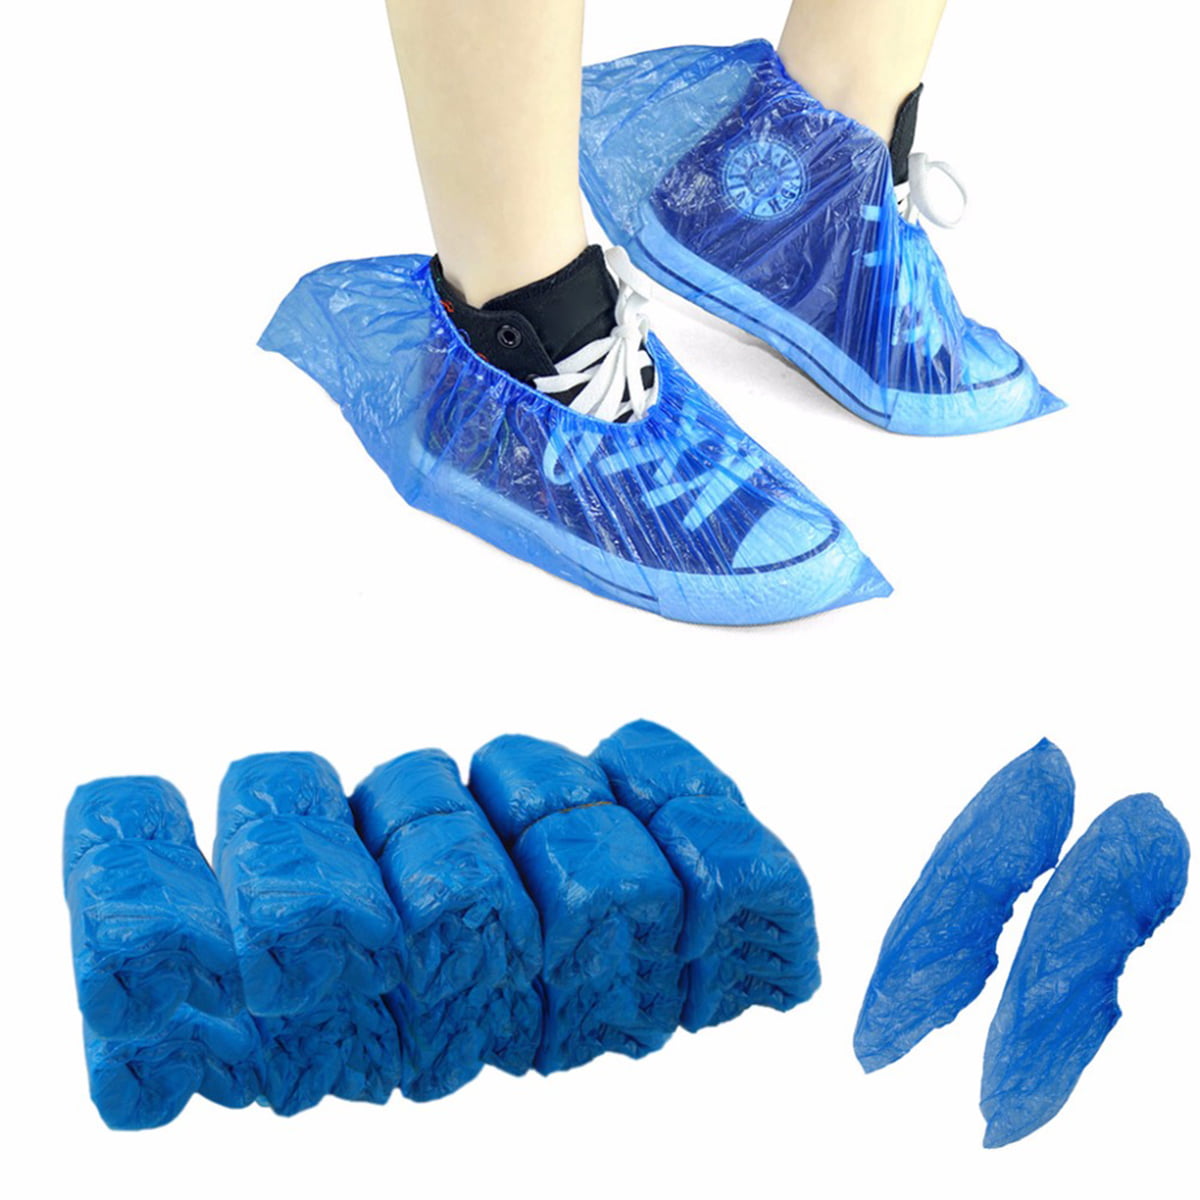 100 Pcs Disposable Shoe Covers Waterproof Anti Slip Boot Cover Overshoes Boot US 